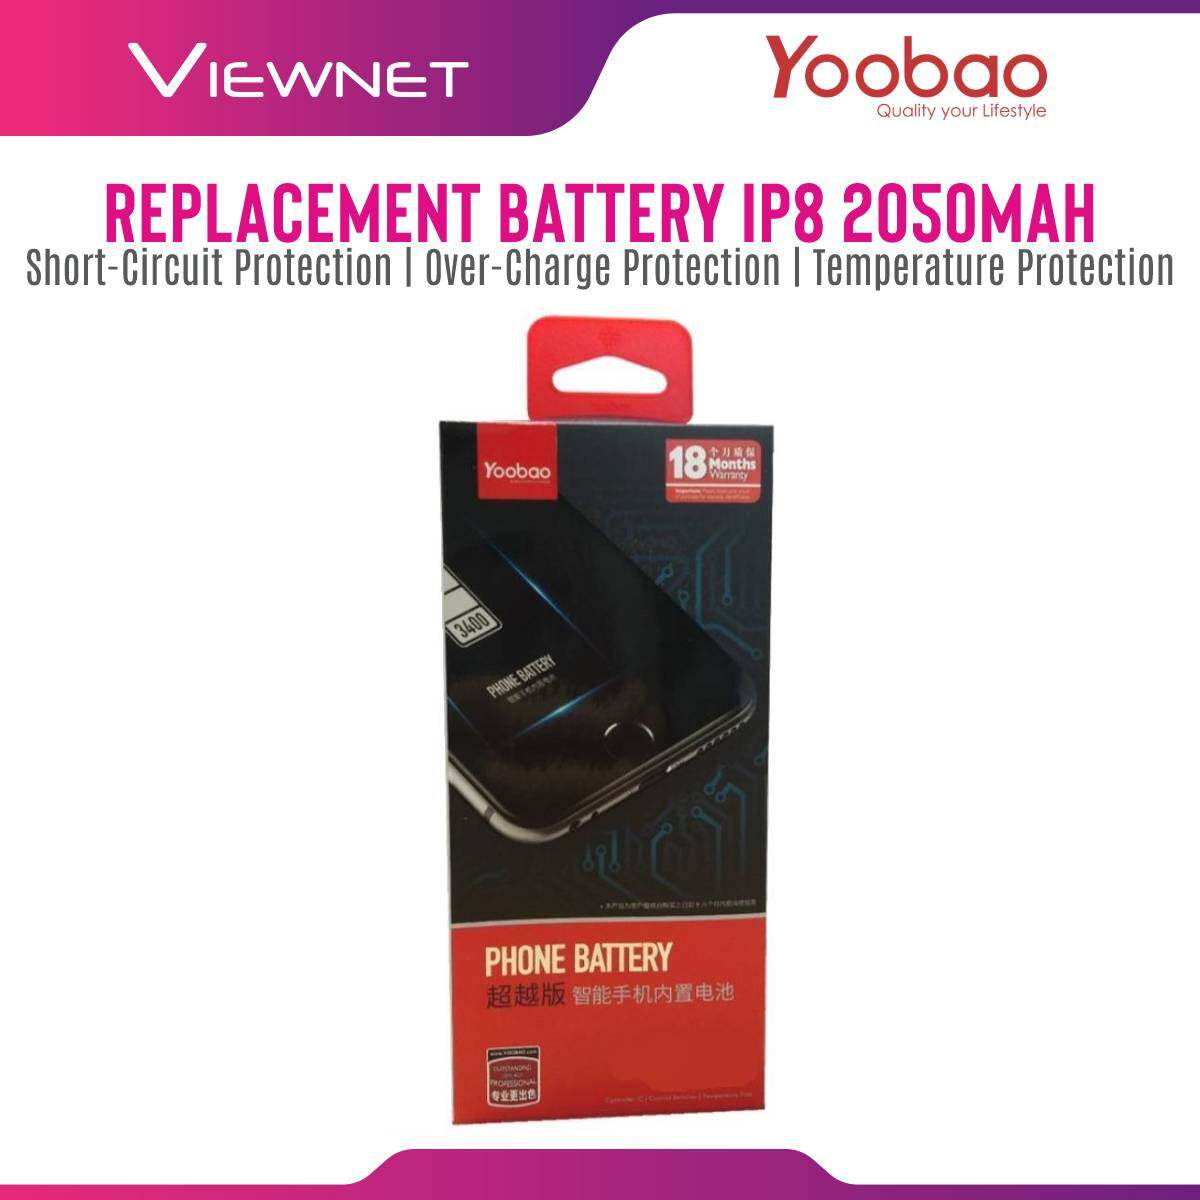 Yoobao Iphone 8 [2050MAH] 3.8V Replacement Advance Battery 12 Month Warranty